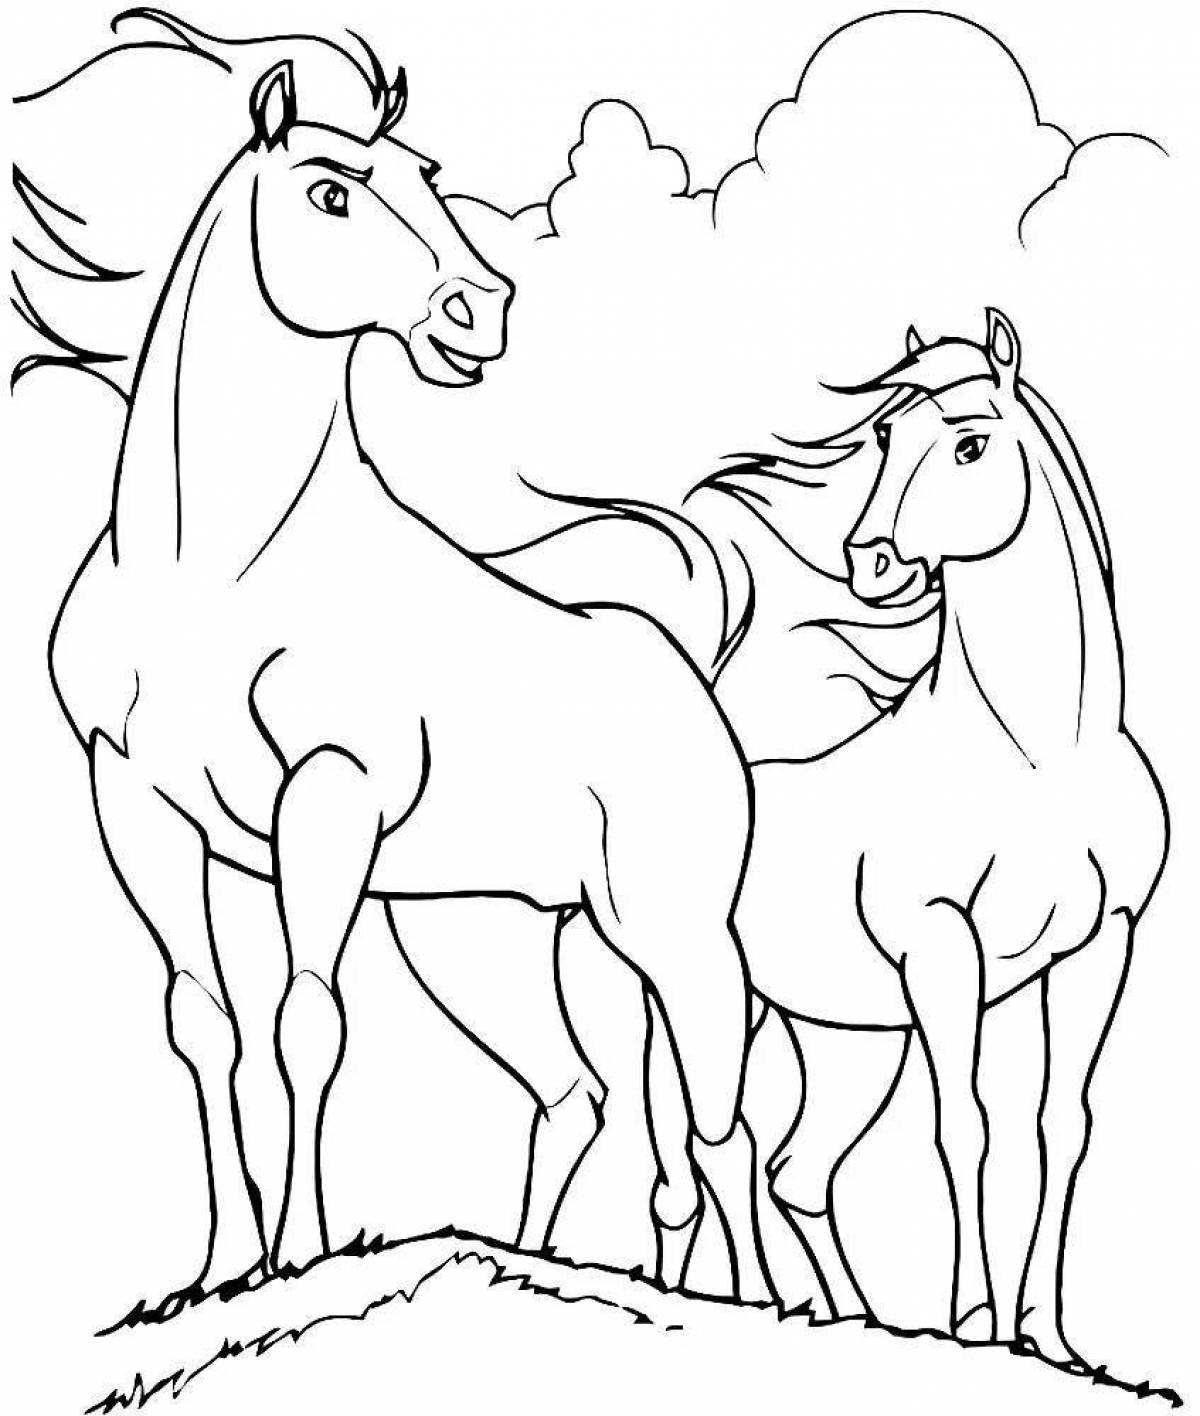 Playful horse family coloring book